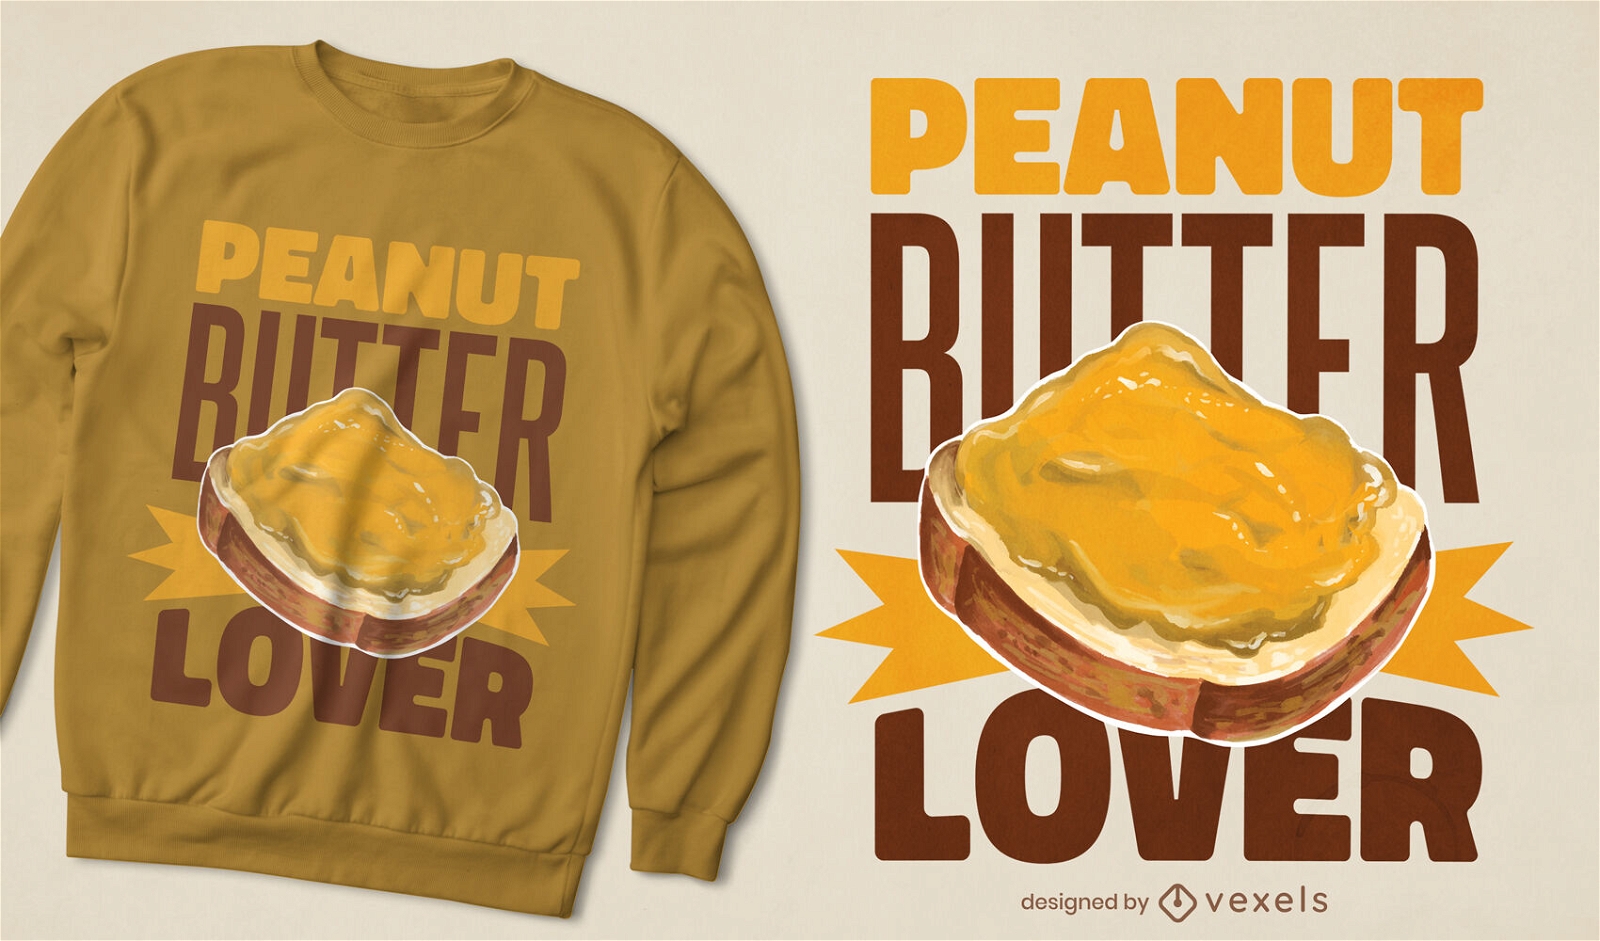 Bread with butter food t-shirt design